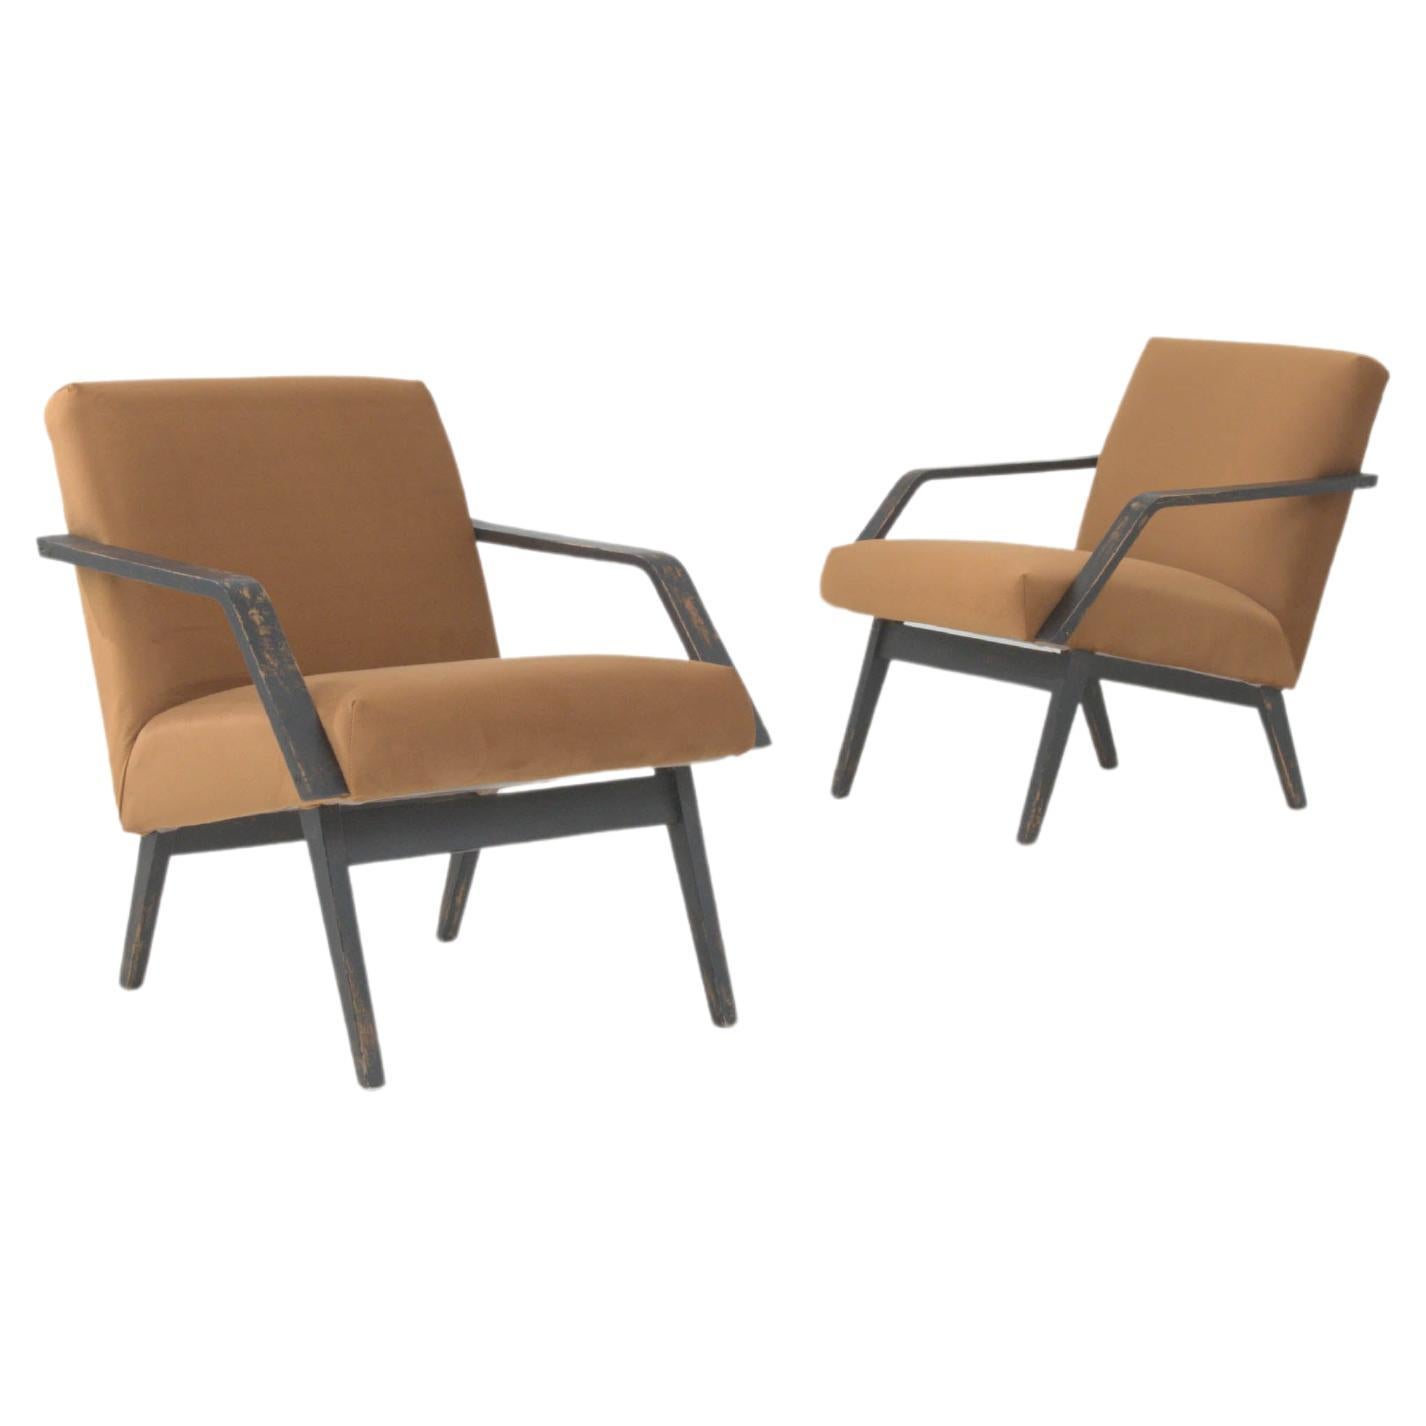 1960s Czechia Upholstered Armchairs, a Pair For Sale